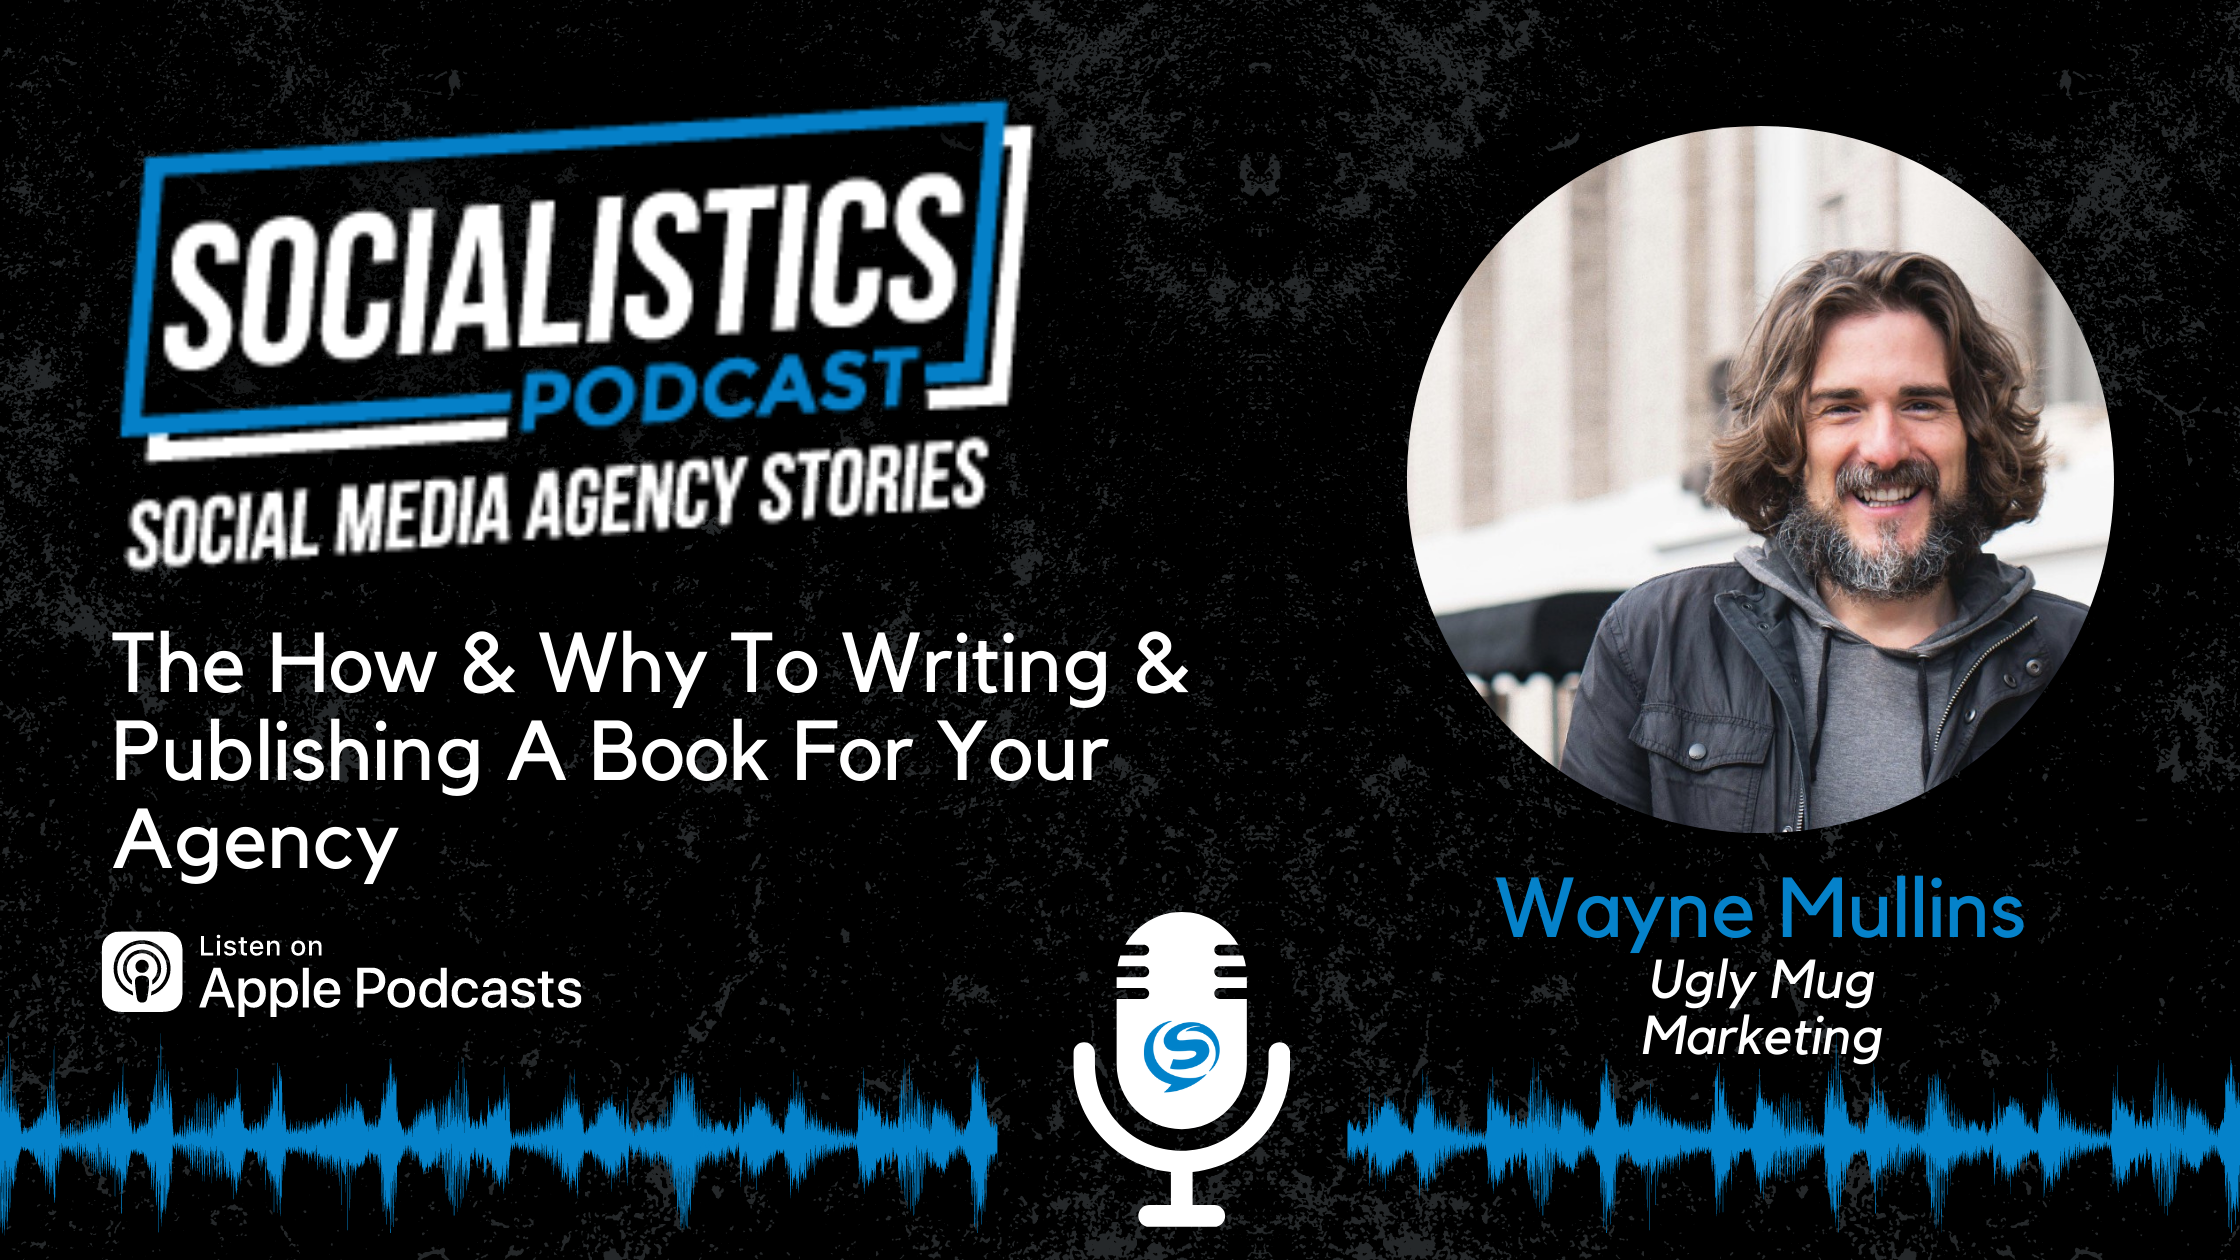 The How & Why To Writing & Publishing A Book For Your Agency